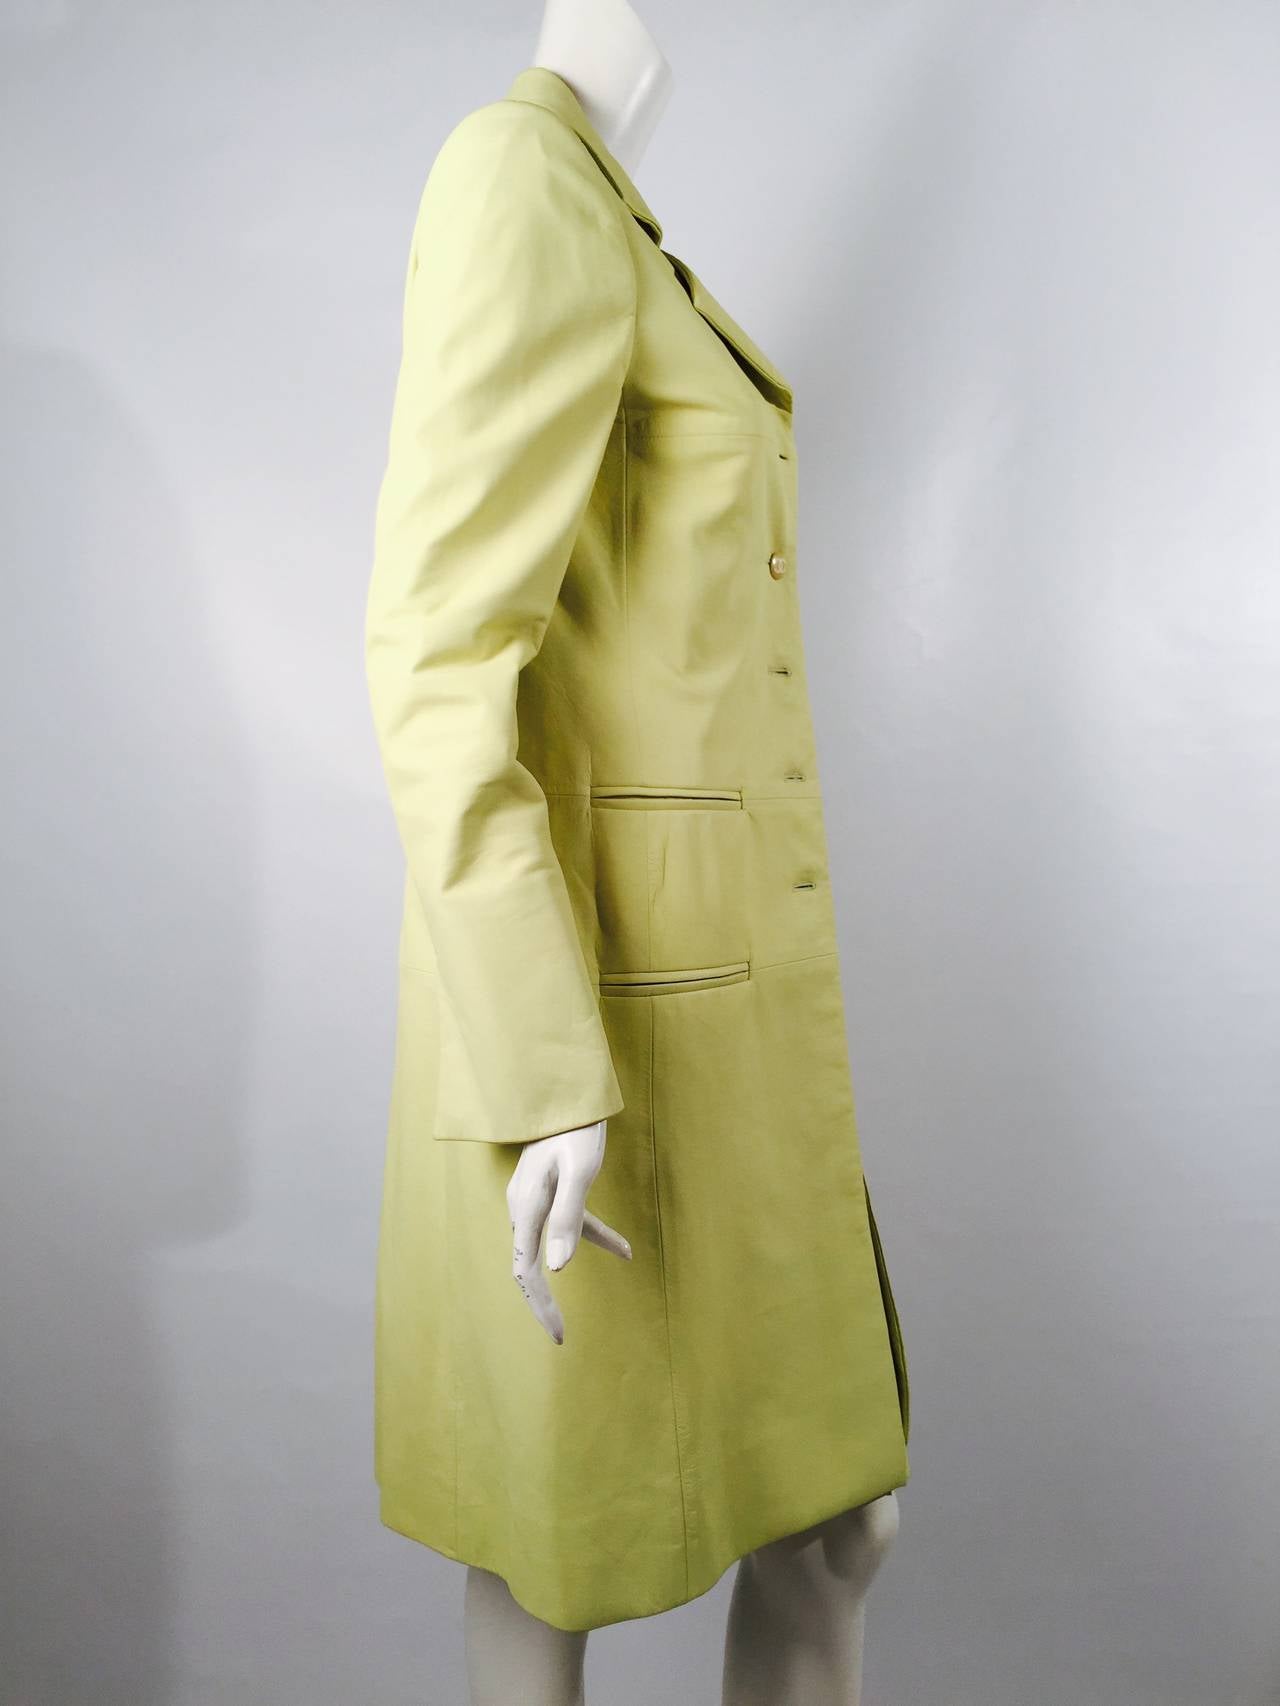 Chanel Cruise 2004 Citrus Lambskin Leather Ensemble In Excellent Condition For Sale In Palm Beach, FL